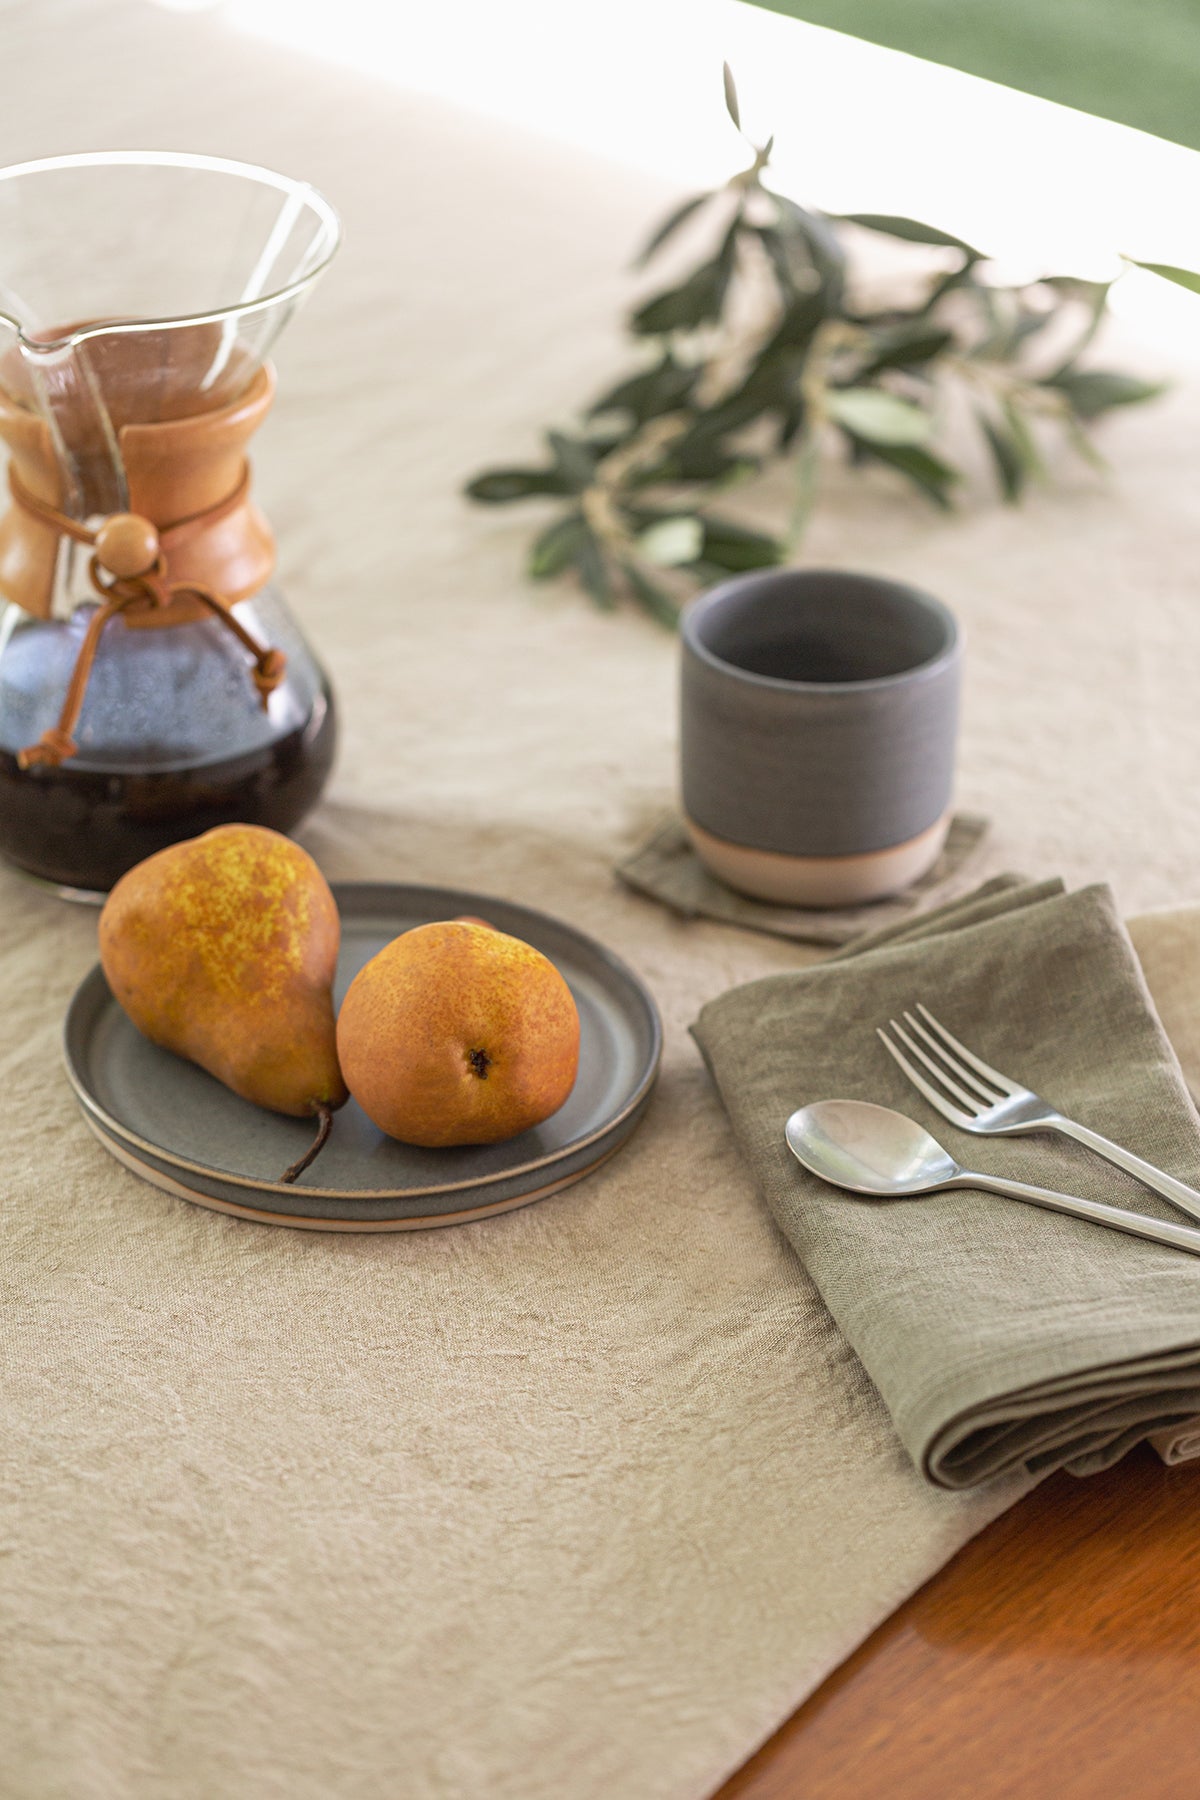 An elegant table setting featuring two pears on a plate, a coffee carafe, a cup, and neatly arranged silverware on Jenny Graham Home linen napkins.-15227668693185